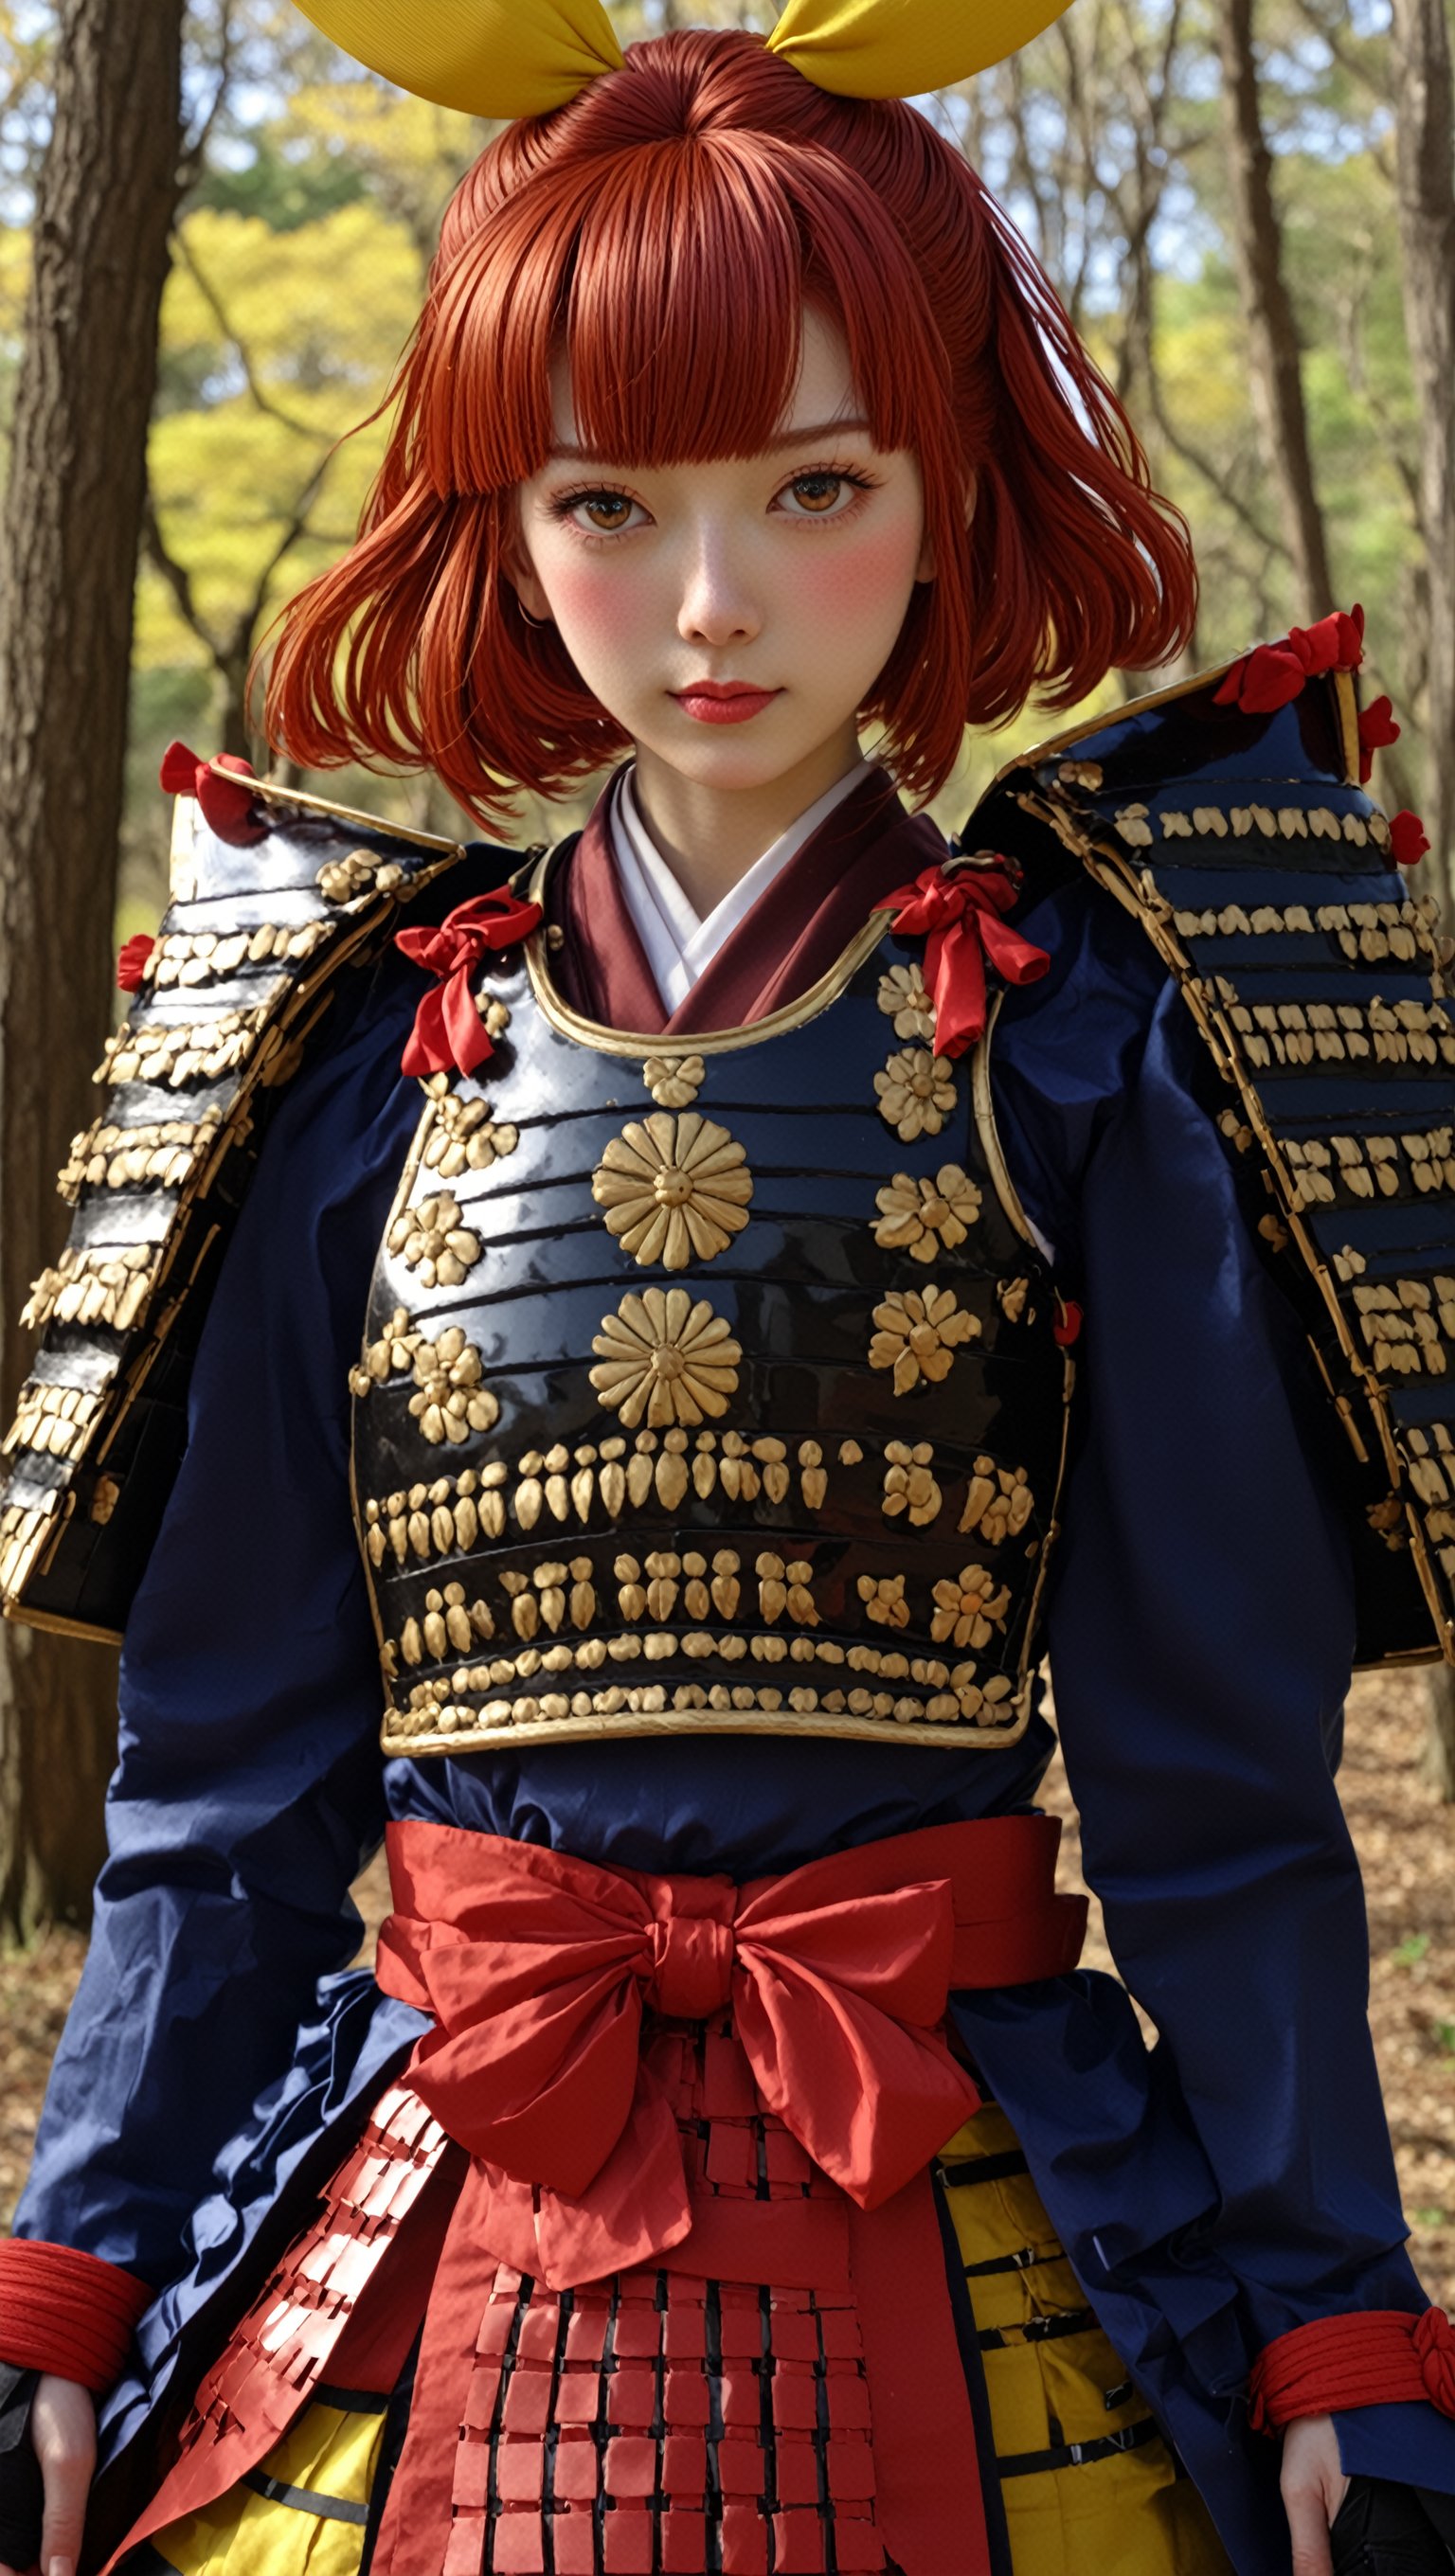 1girl,cute Face,dressed in samurai-style armor, She wears traditional Japanese armor reminiscent of a samurai,Blue coat, yellow hakama
,The design blends elegance with strength, portraying her as a warrior princess,(Large red head ribbon),
Adorning her head is with a faintly red ribbon tied, shining brightly,warrior,samurai